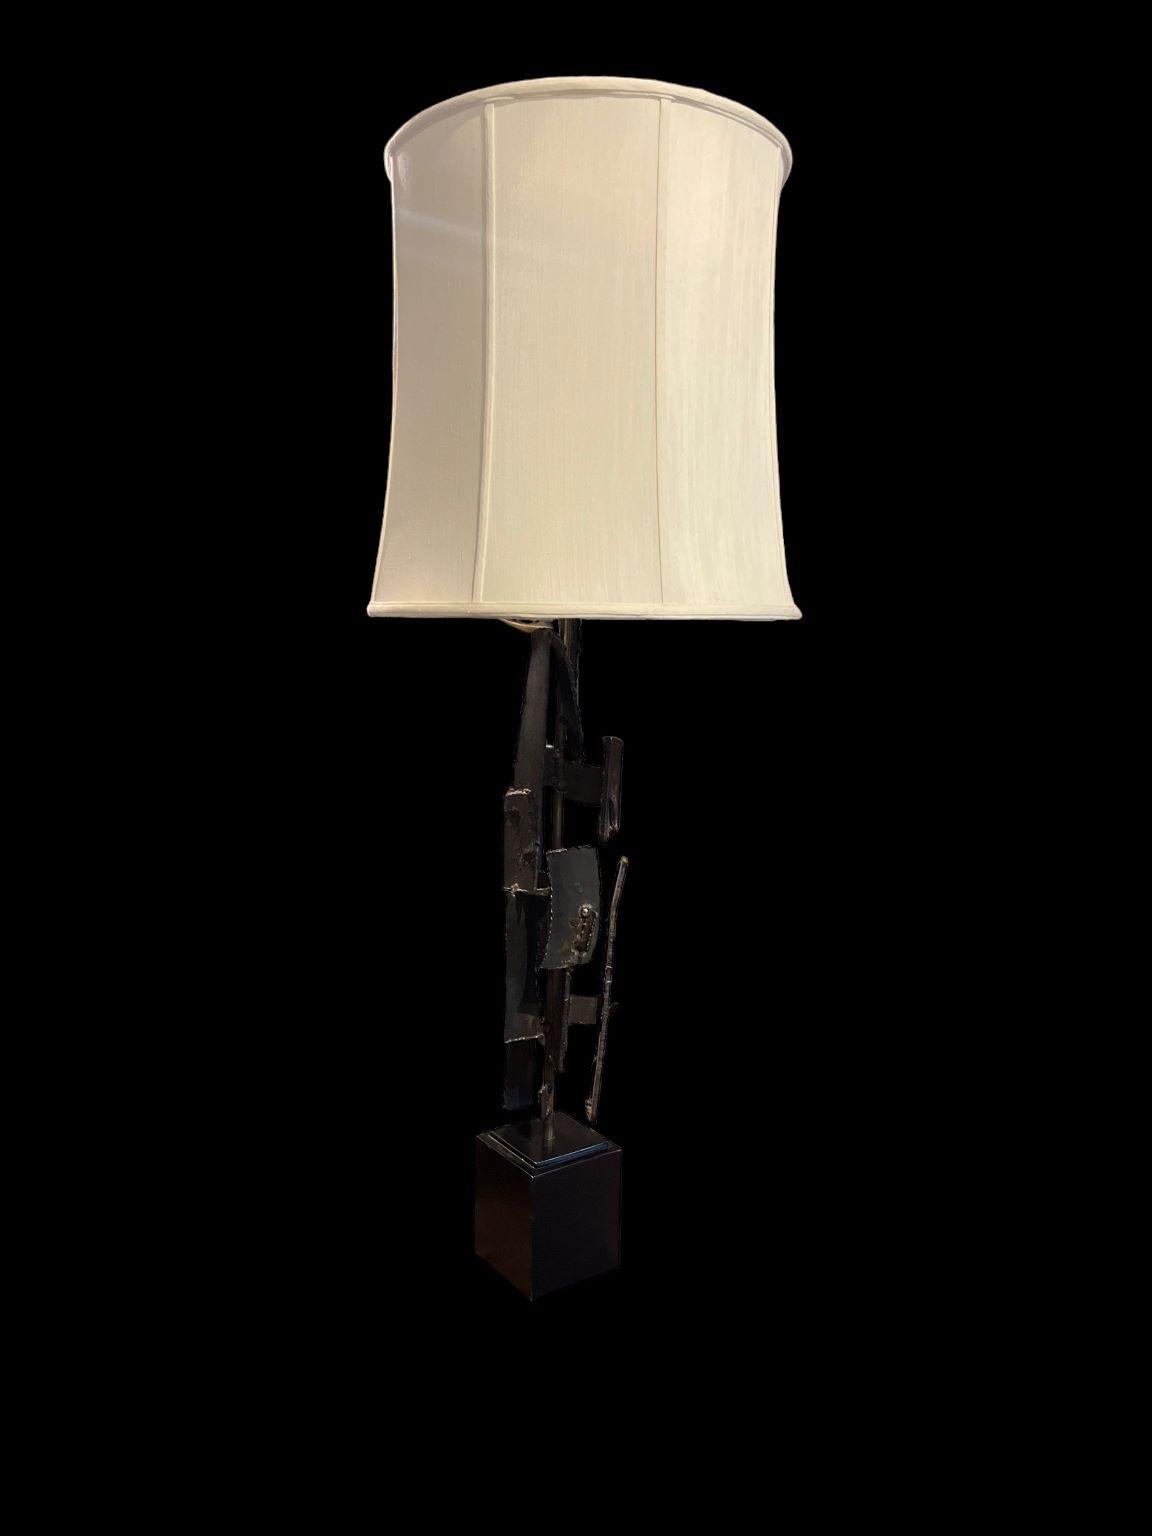 Painted Mid-Century Modern Brutalist Lamp by Richard Barr for Laurel Lamp Company C.1970 For Sale